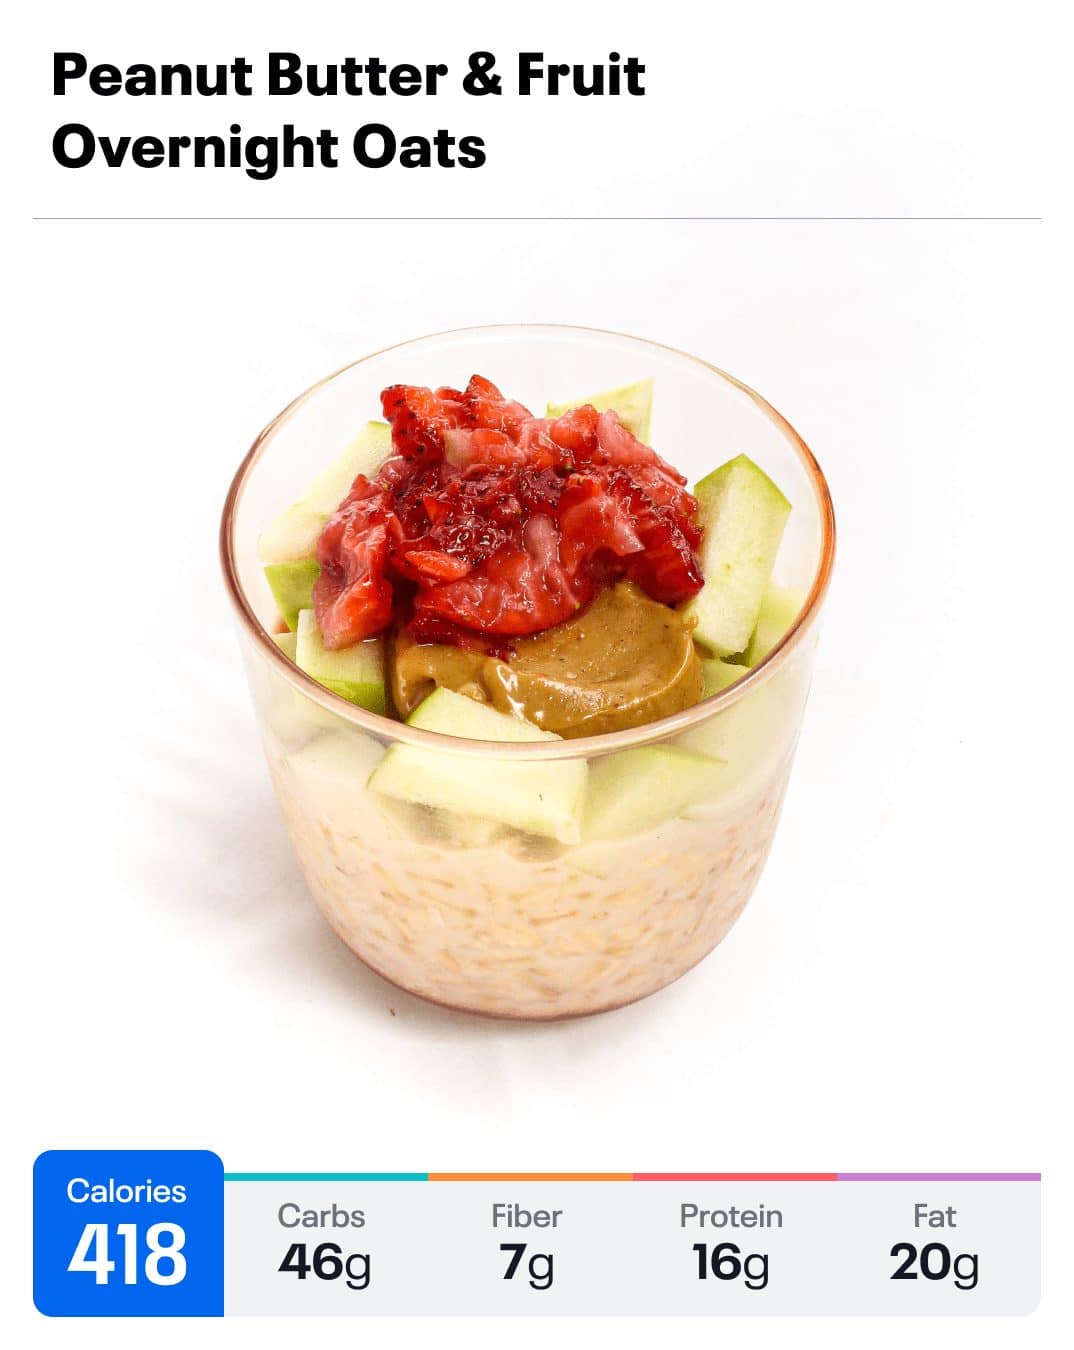 Overnight Oats With up to 21 Grams of Protein